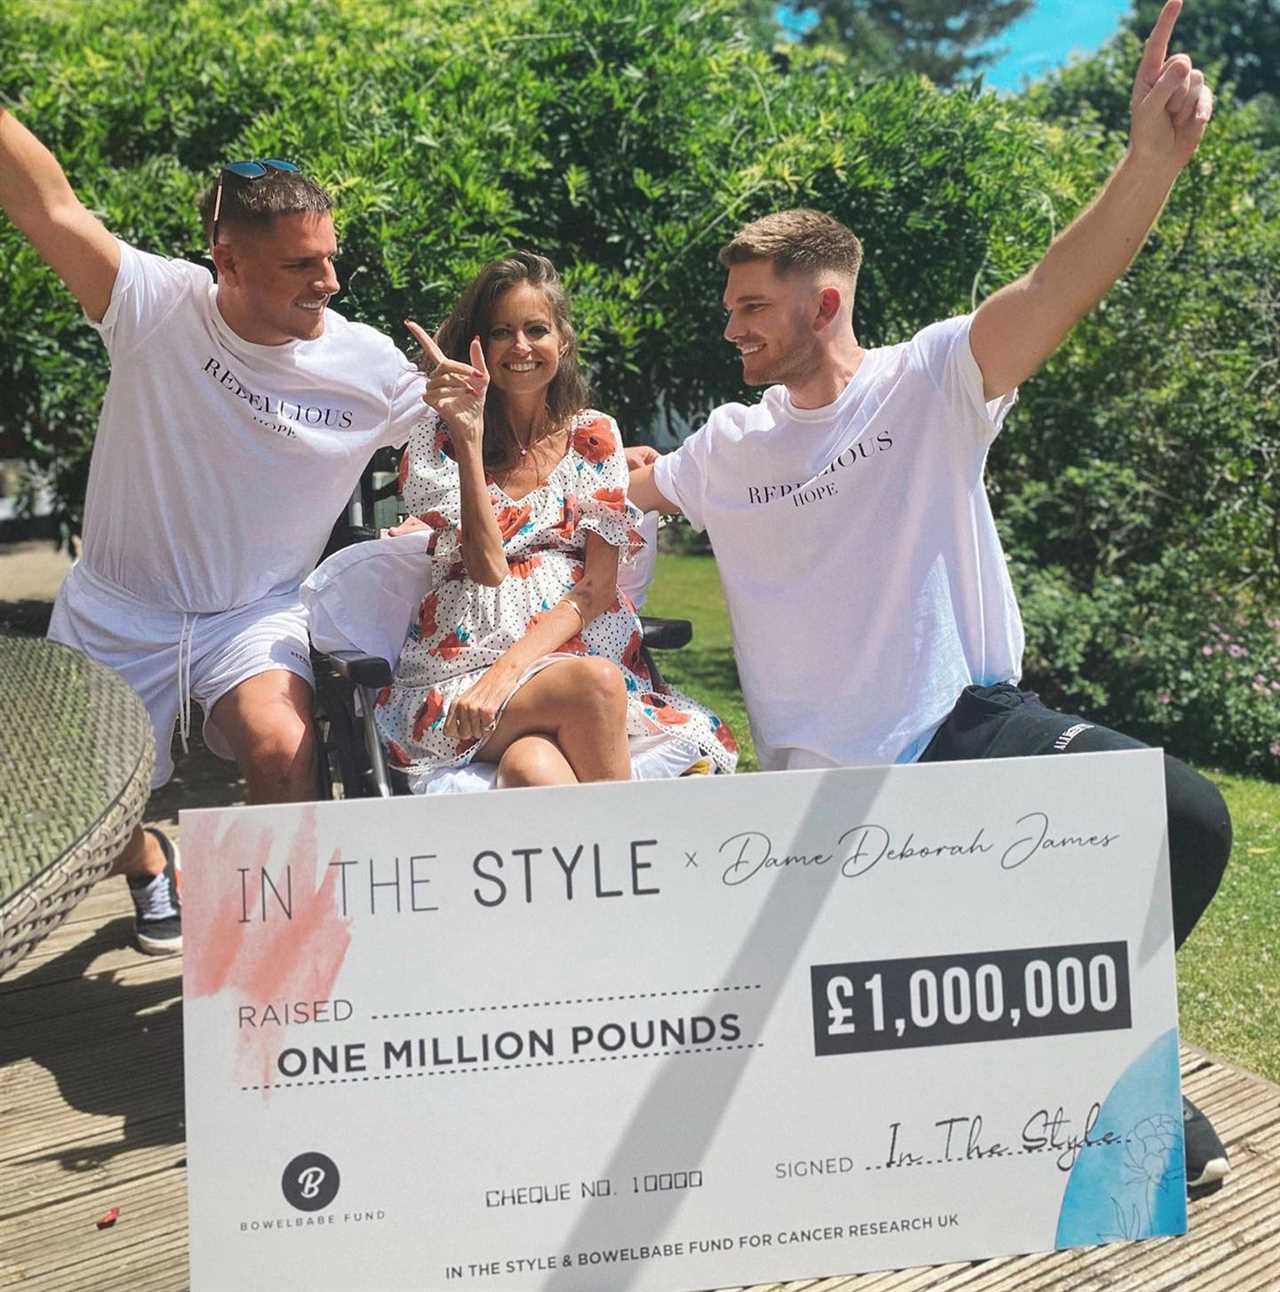 Deborah James ‘overwhelmed’ as In The Style campaign raises £1million for charity & says fashion range ‘kept her going’